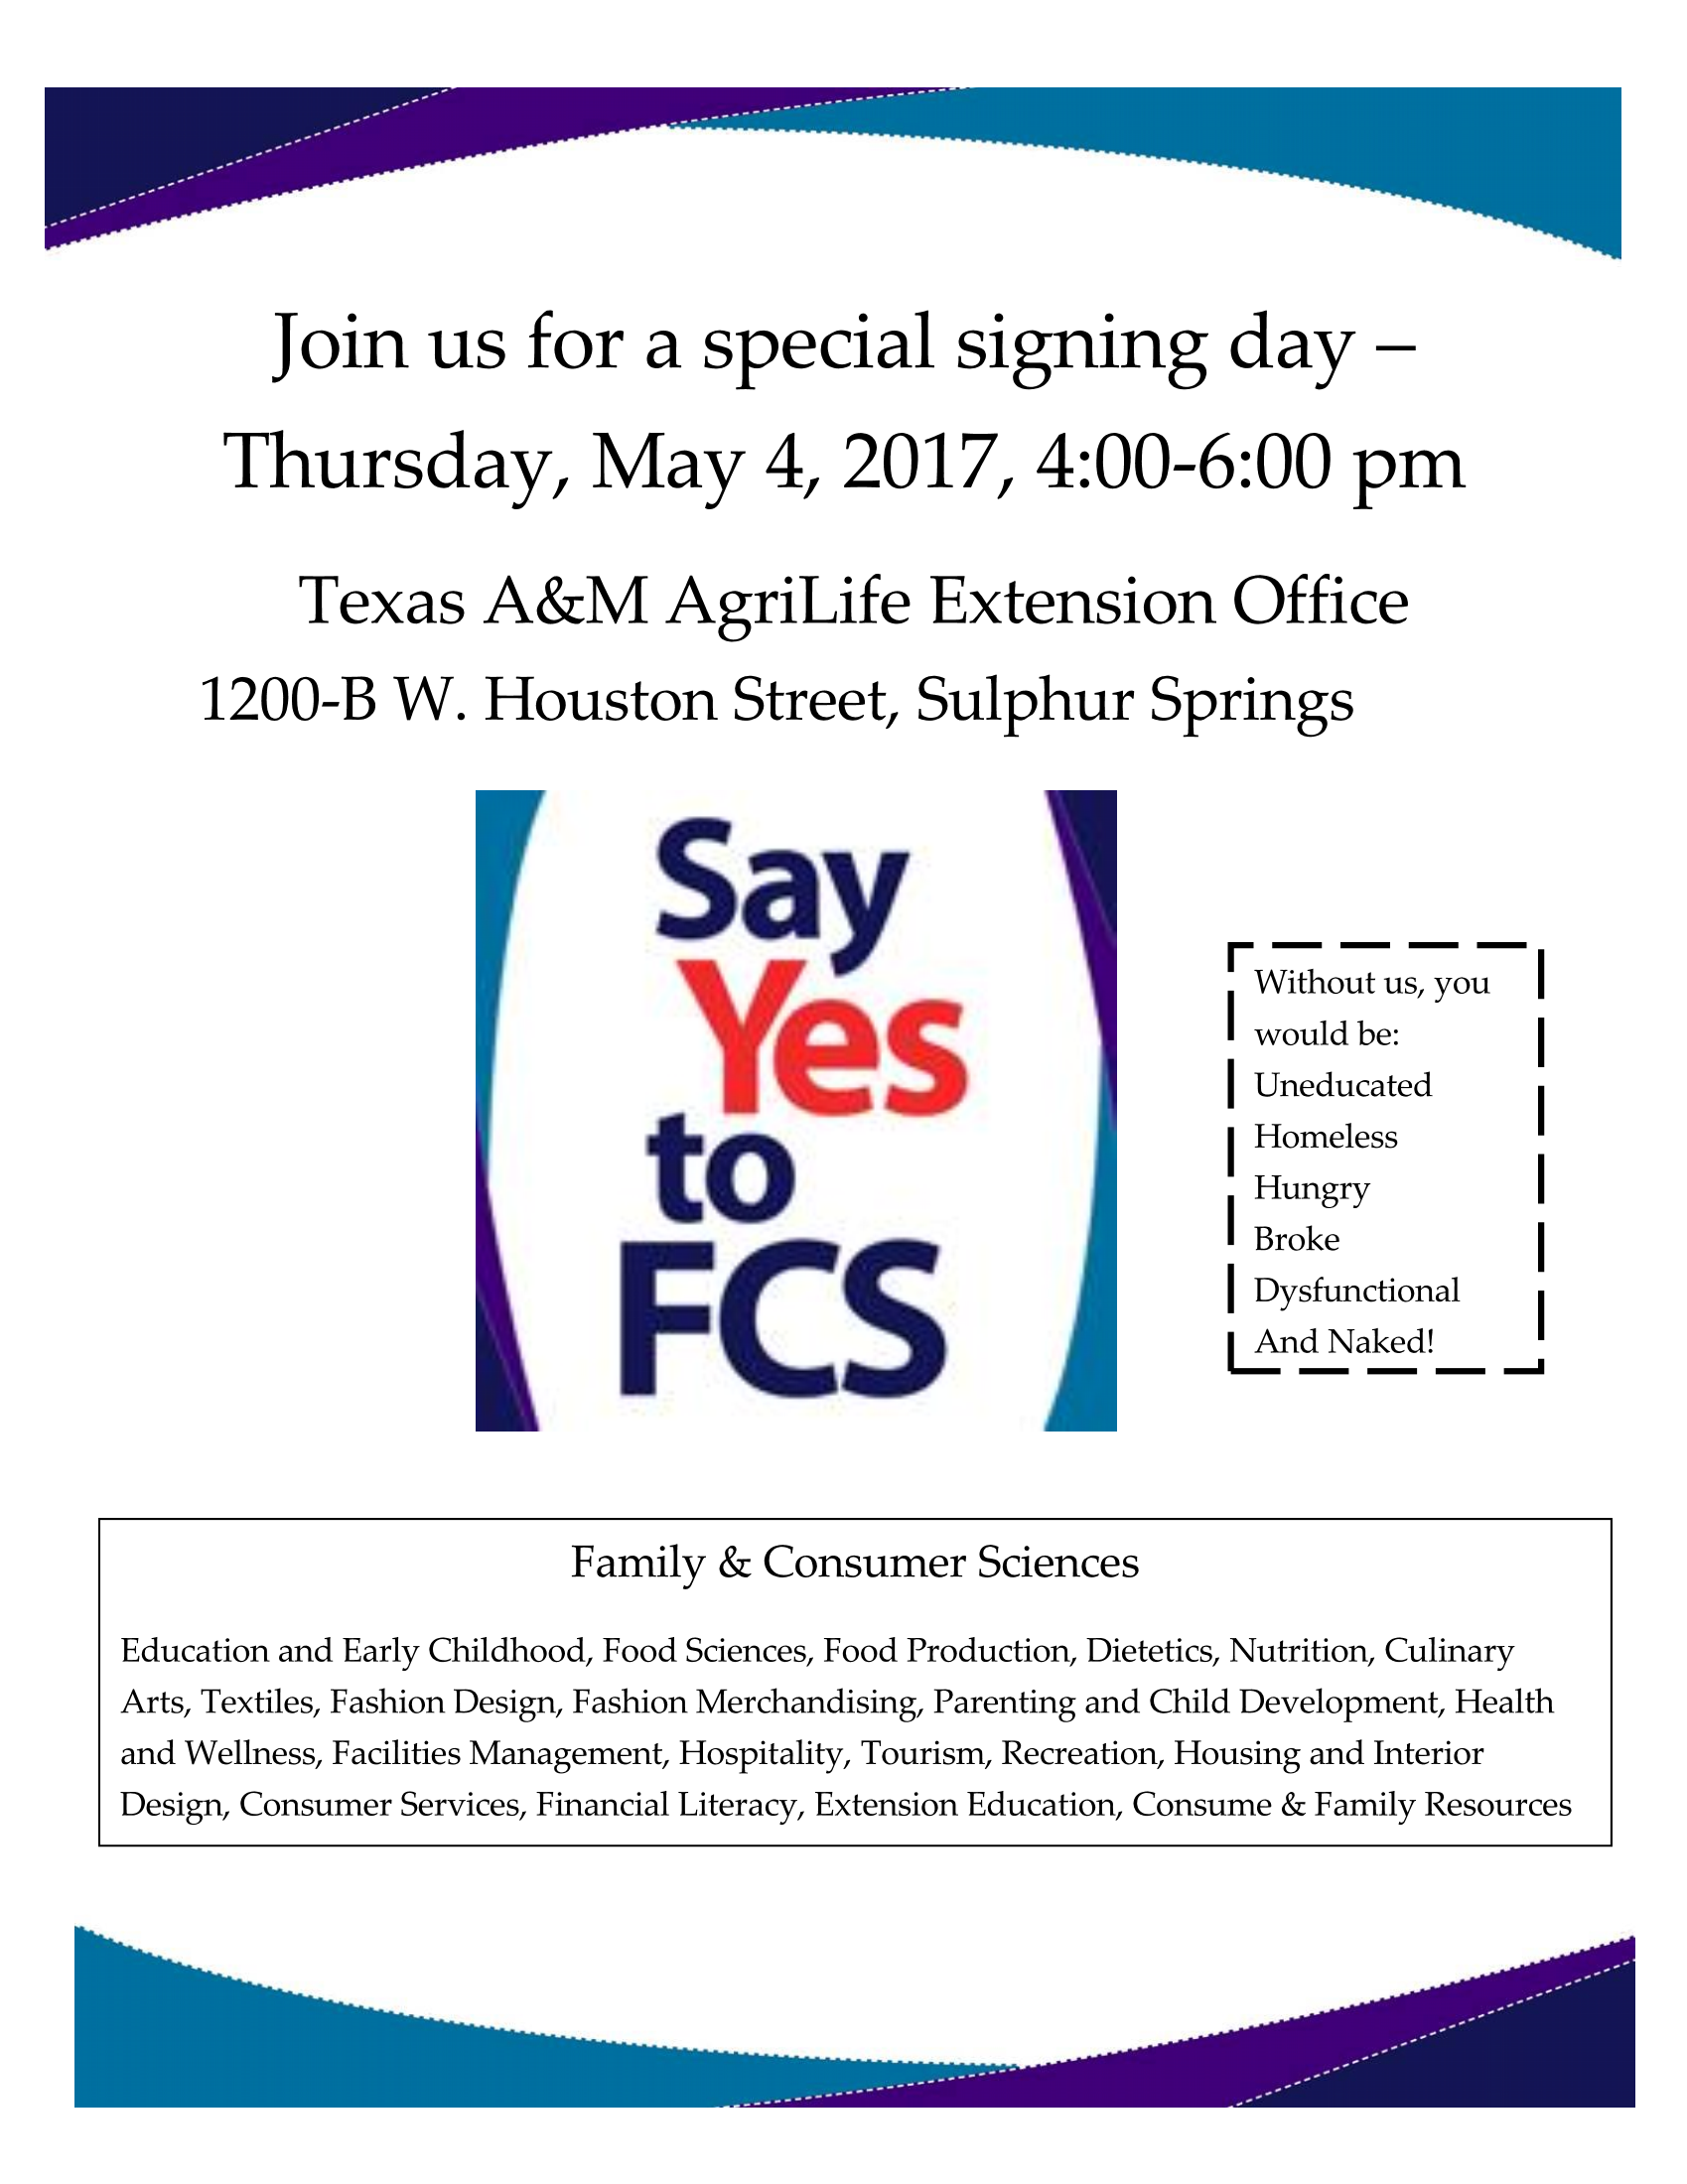 Say Yes to FCS Signing Day Coming Up May 4th